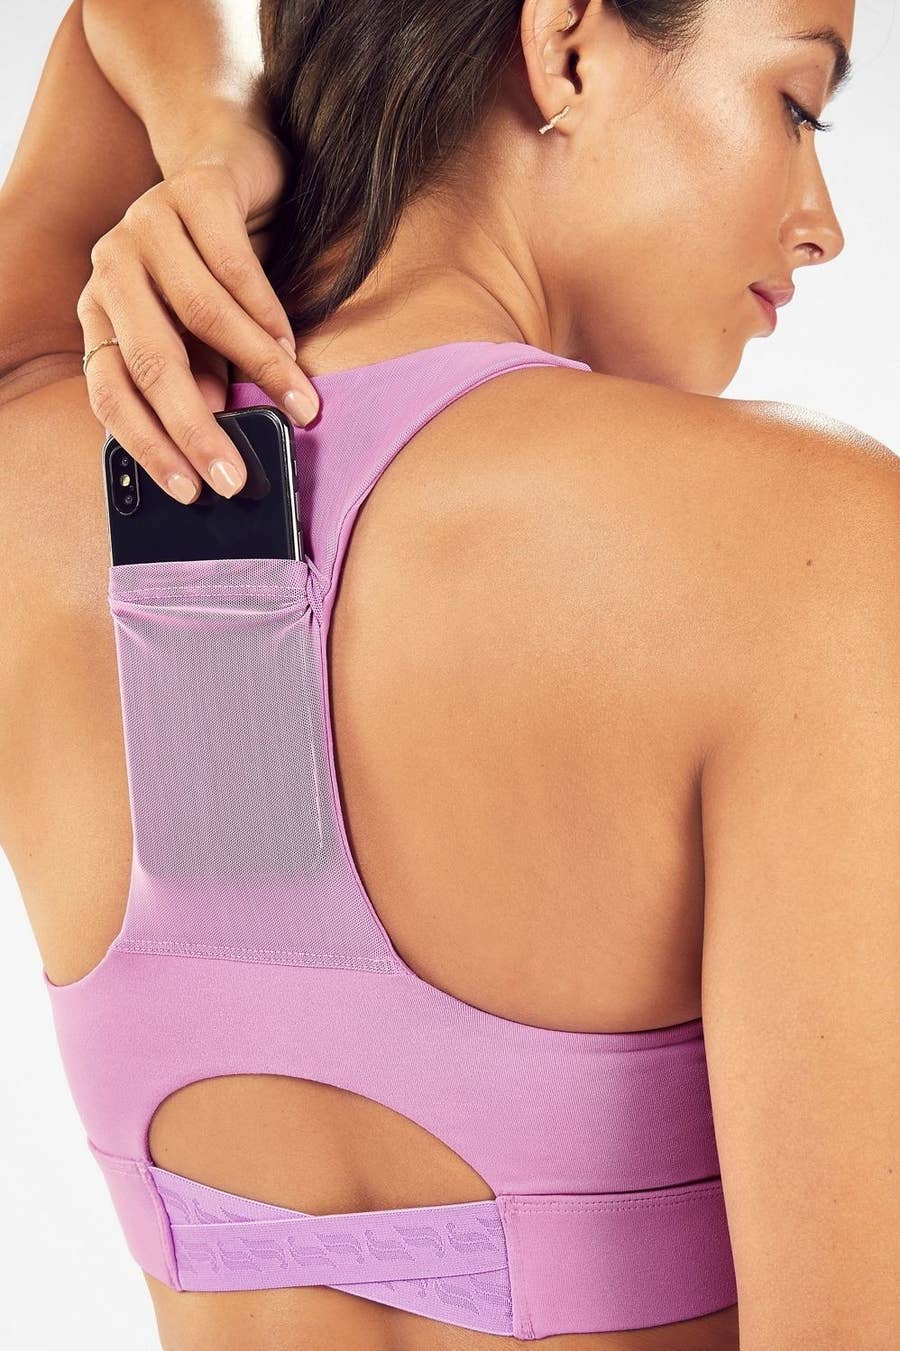 28 Pieces Of Workout Clothing To Add To Your Wardrobe This Year